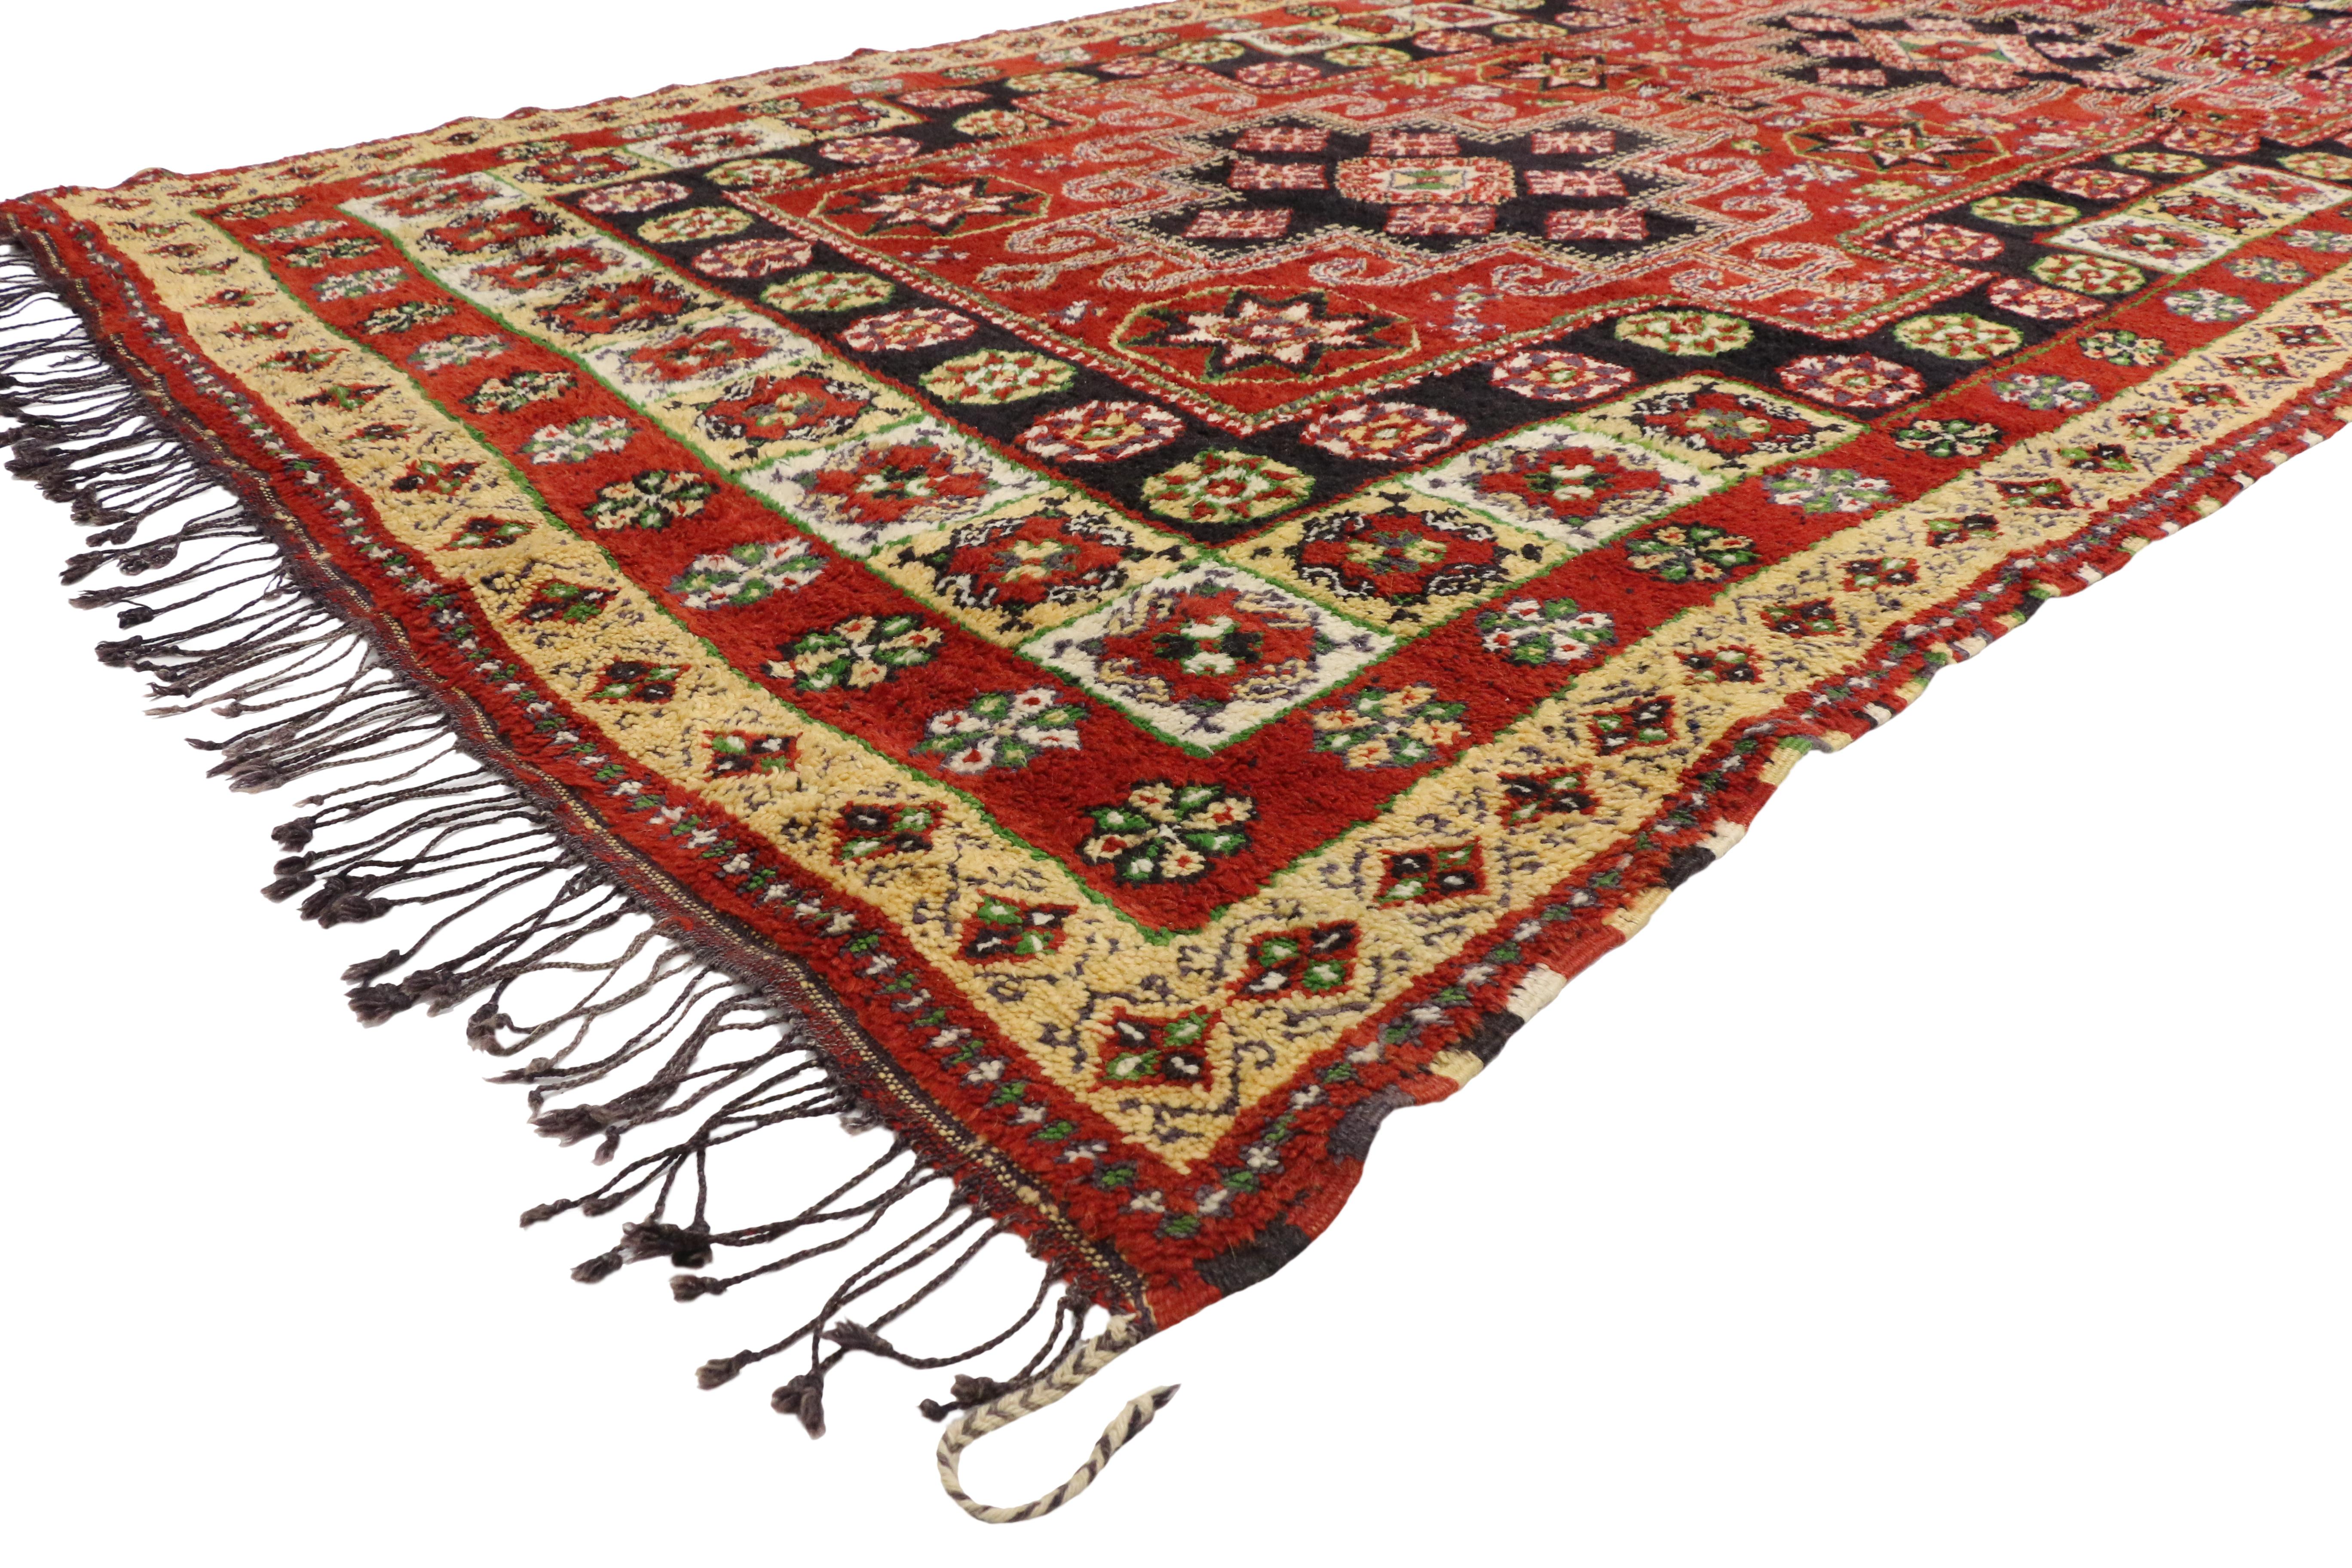 77203, tribal style vintage Rabat Moroccan area rug. Brilliant color and tribal allure collide in this stunning hand-knotted wool vintage Moroccan Rabat area rug. Two latch-hooked stepped medallions elegantly float in the center of an abrashed